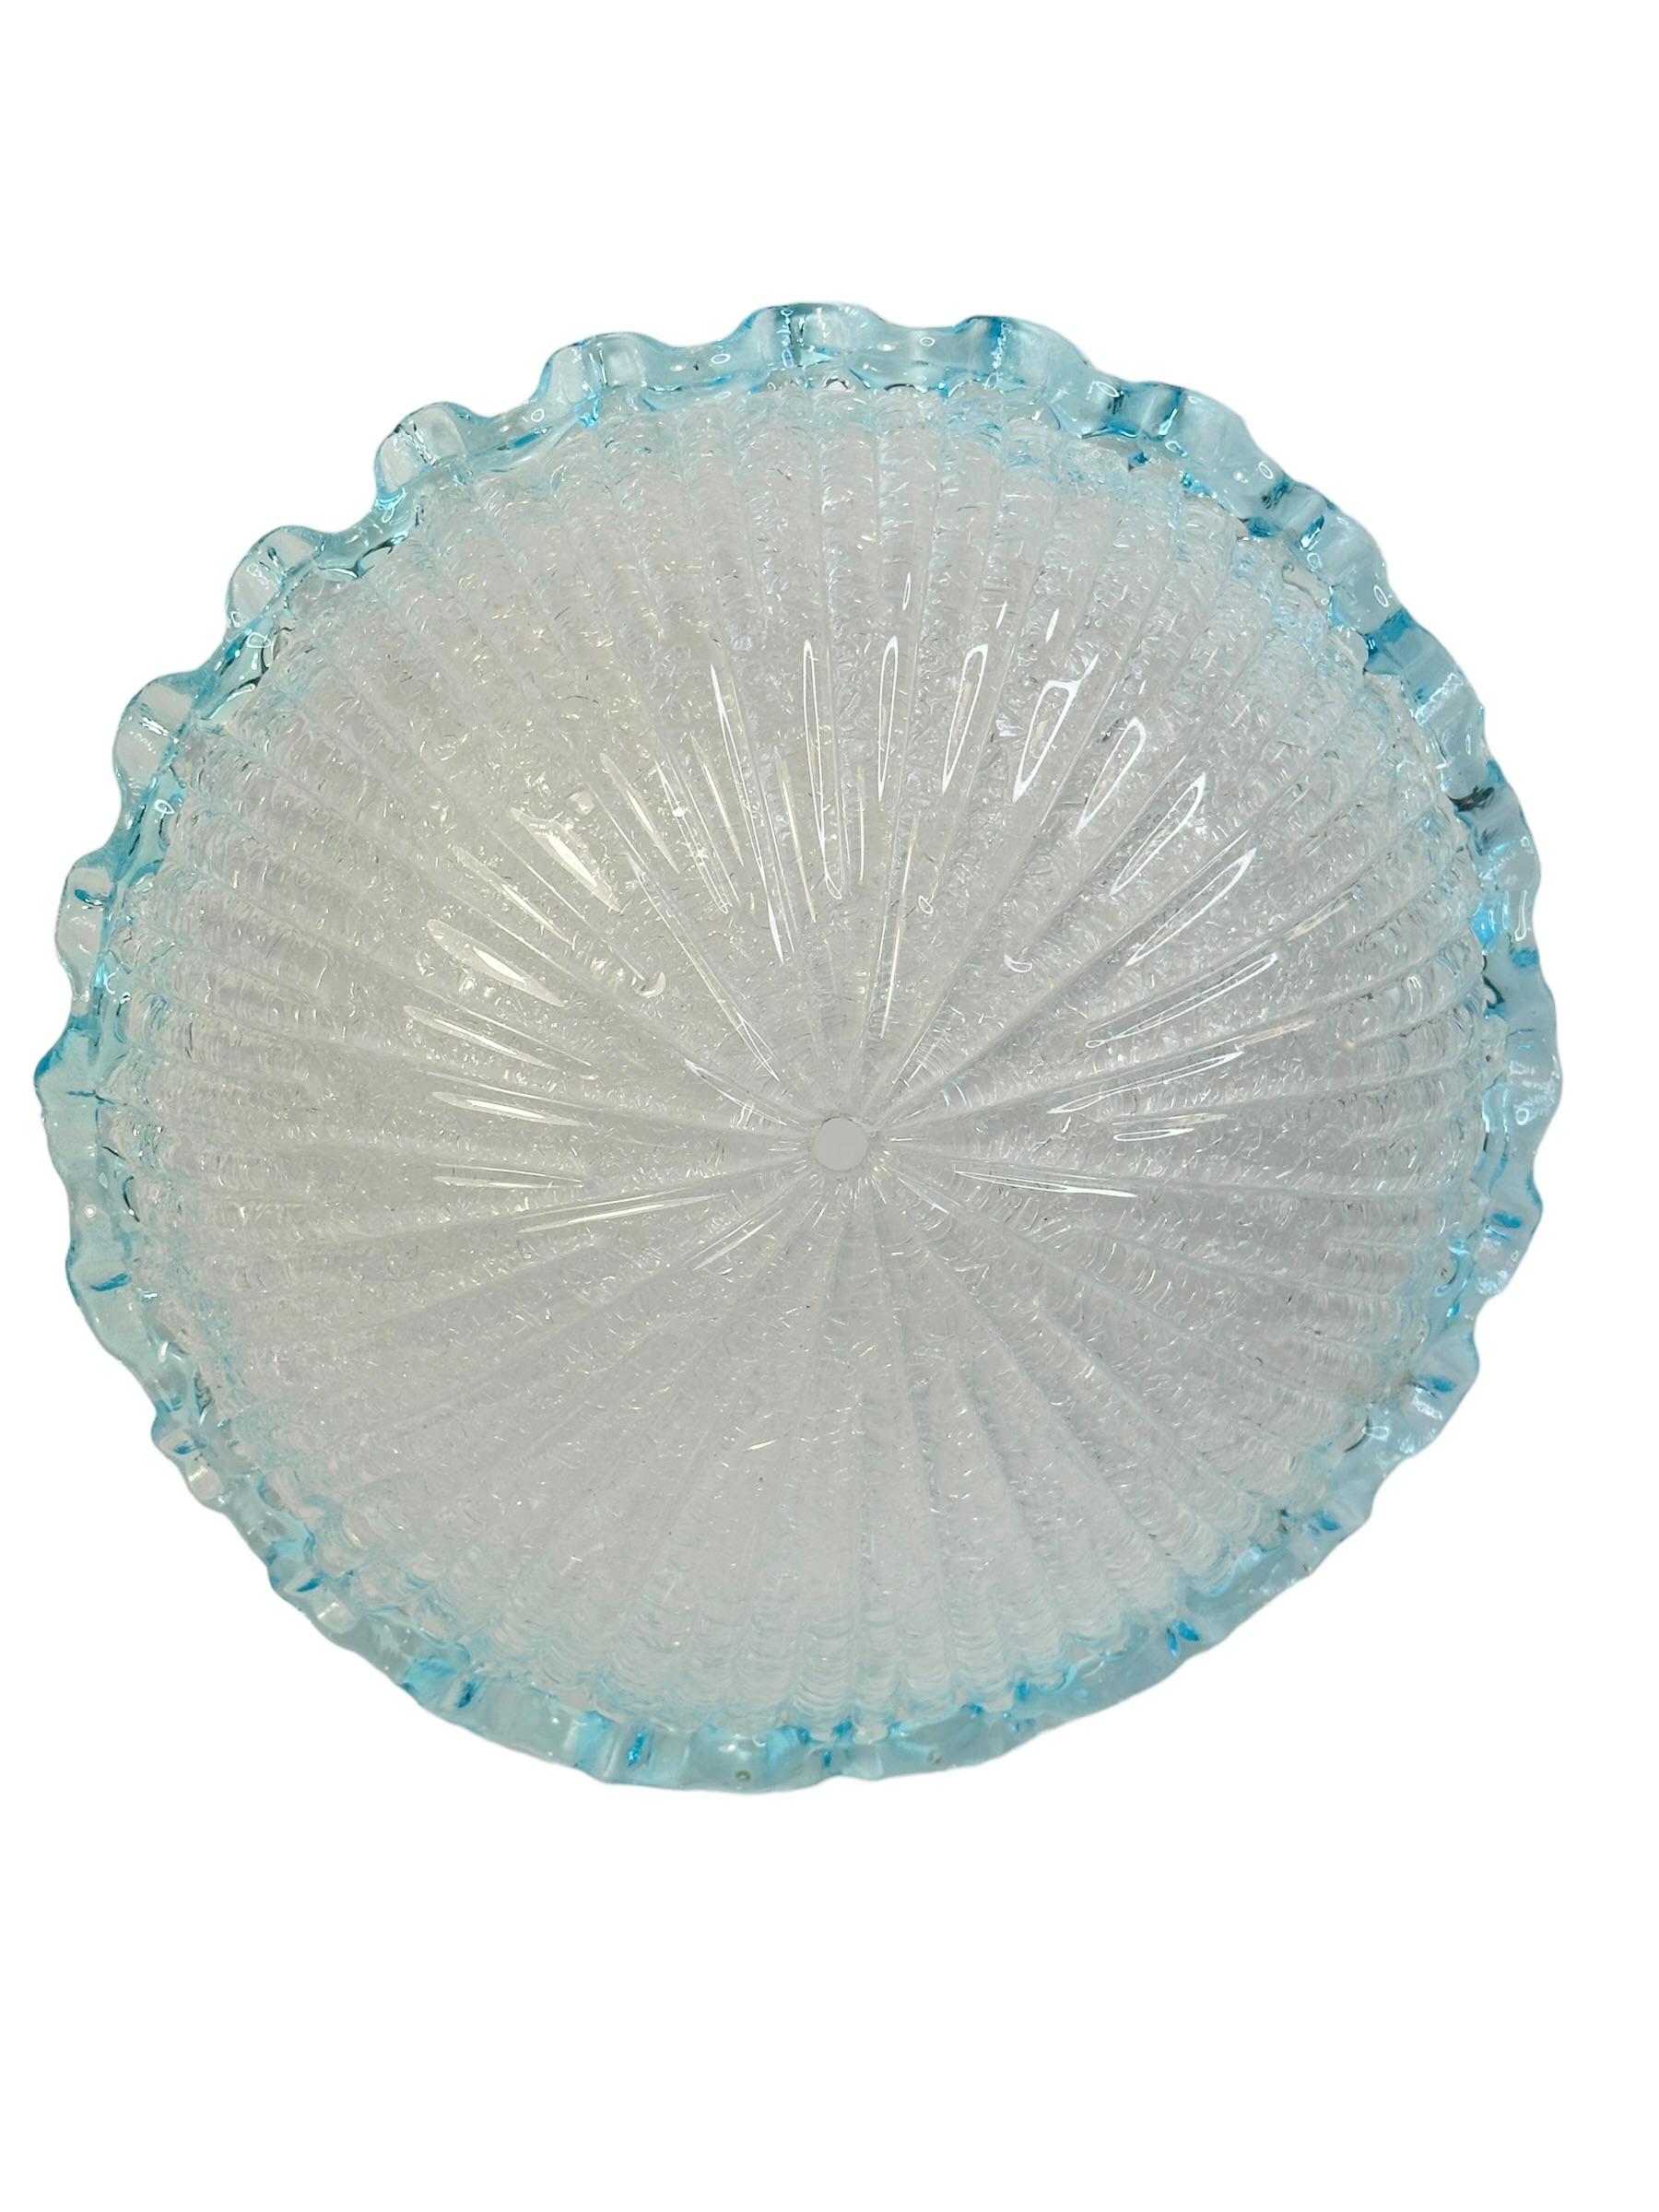 Clear and Light Blue Murano Glass Flush Mount Ceiling Light, Italy, 1970s For Sale 1